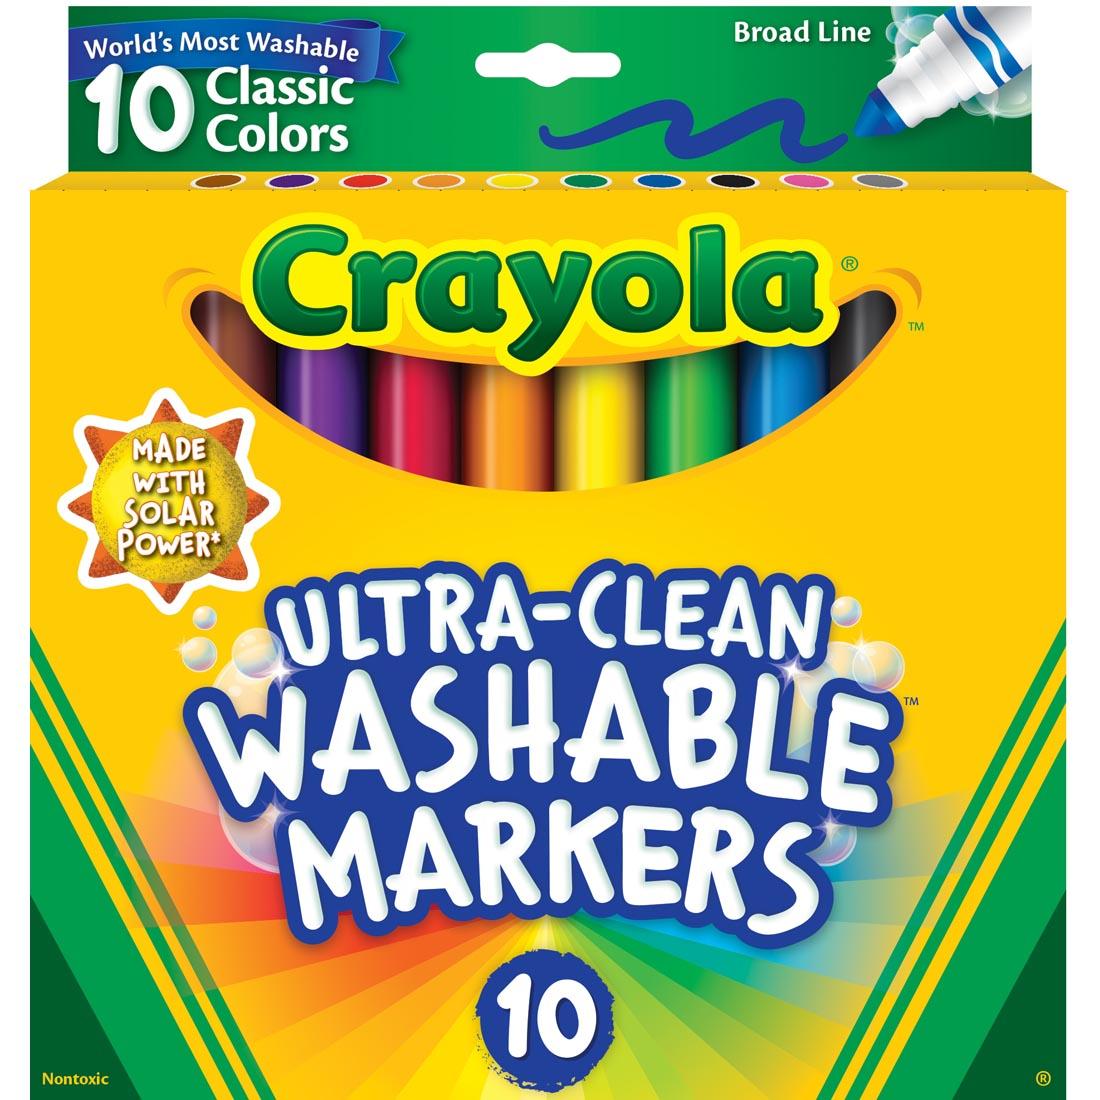 Crayola Ultra-Clean Washable Broad Line Markers 10-Color Set